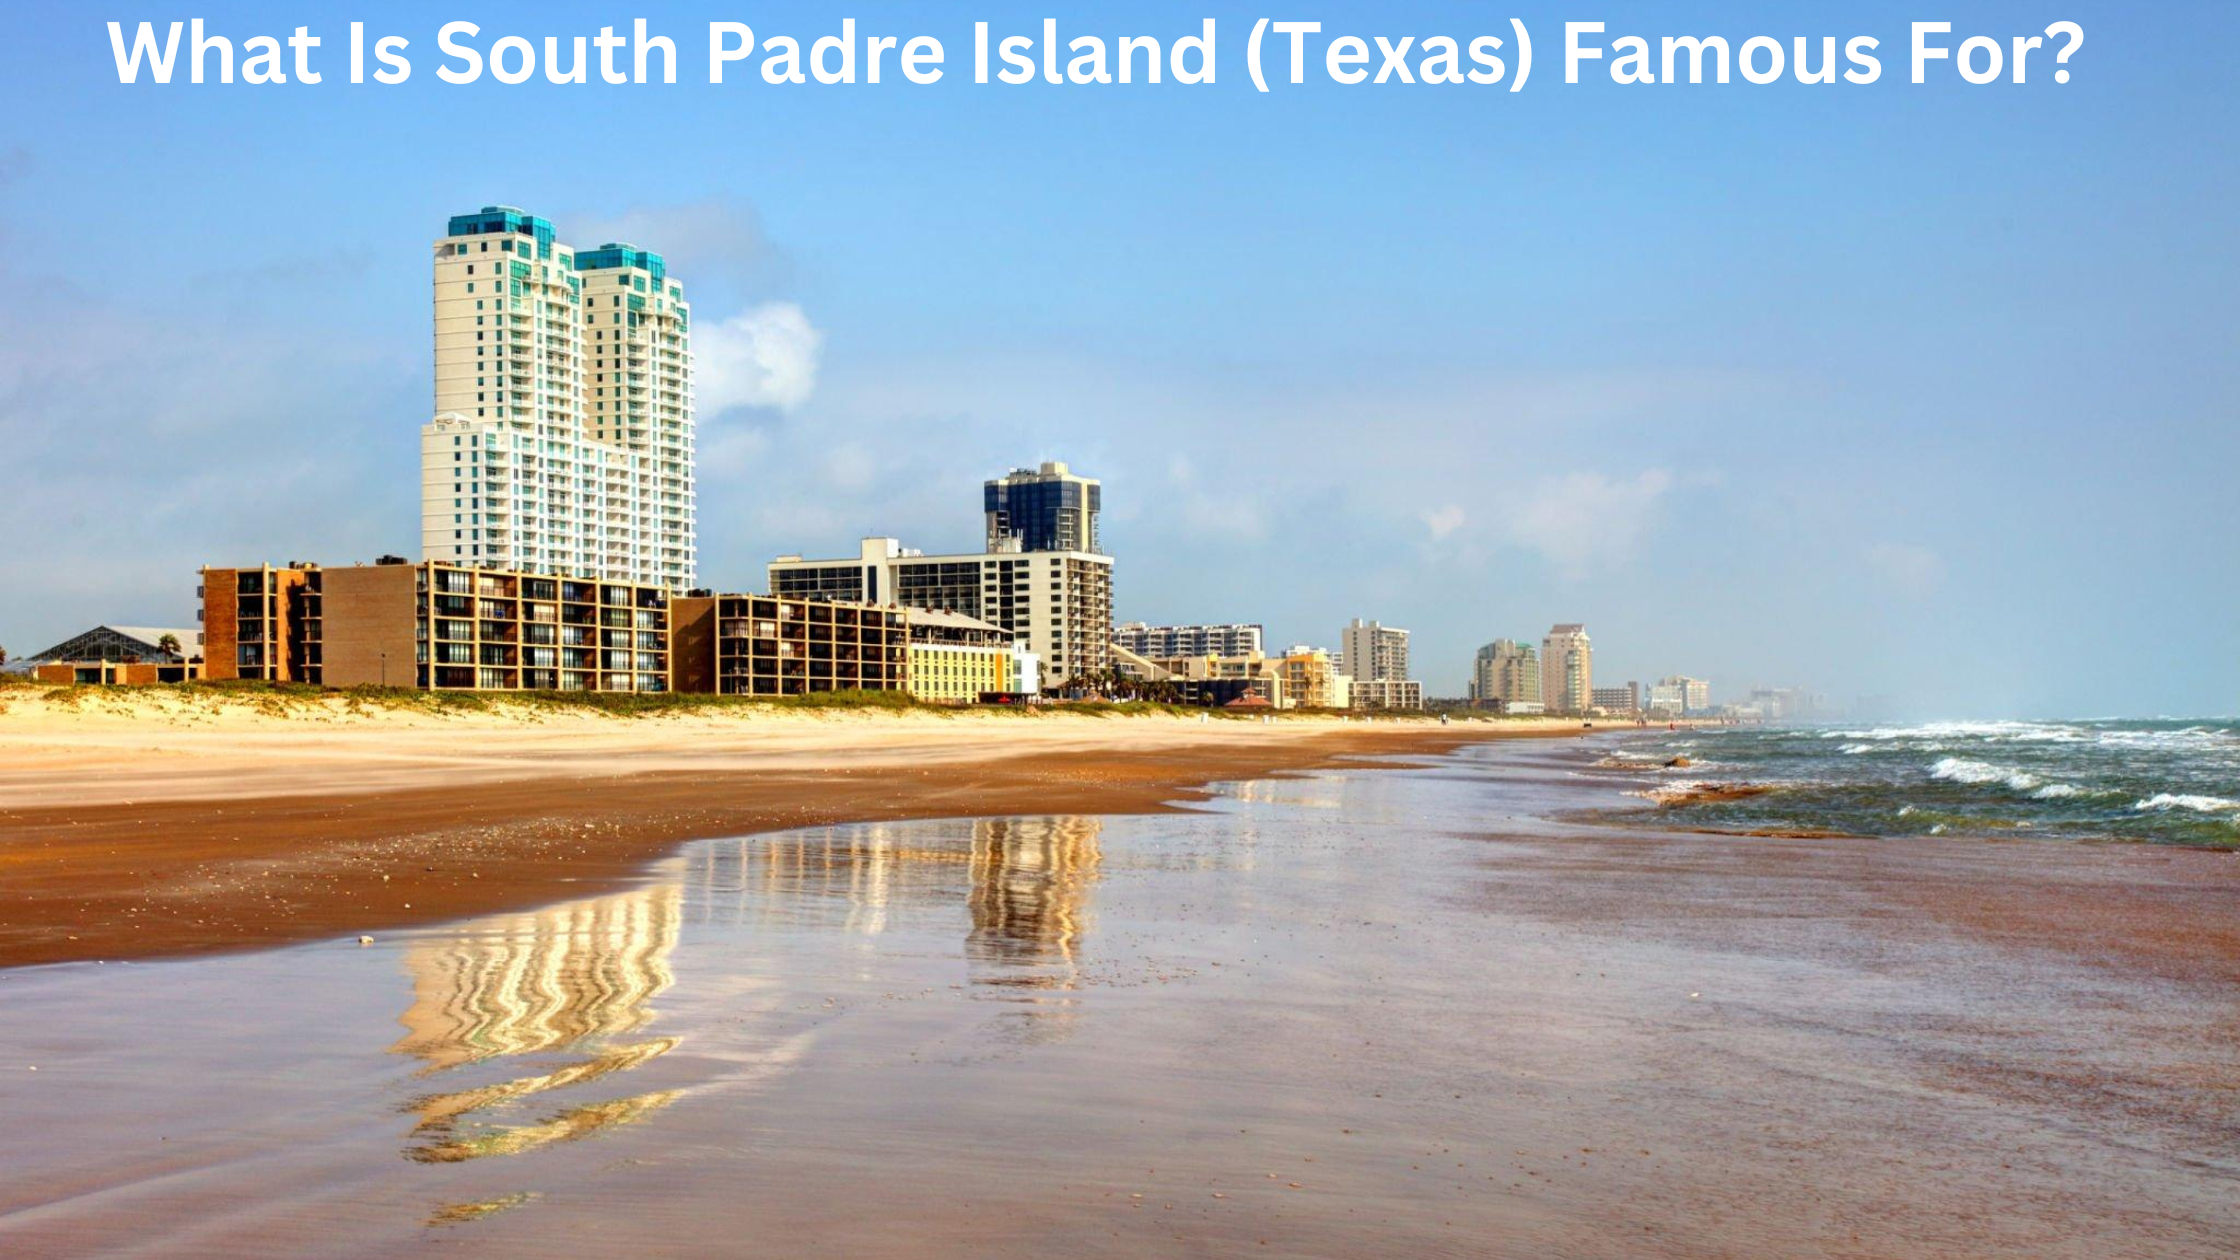 What Is South Padre Island (Texas) Famous For